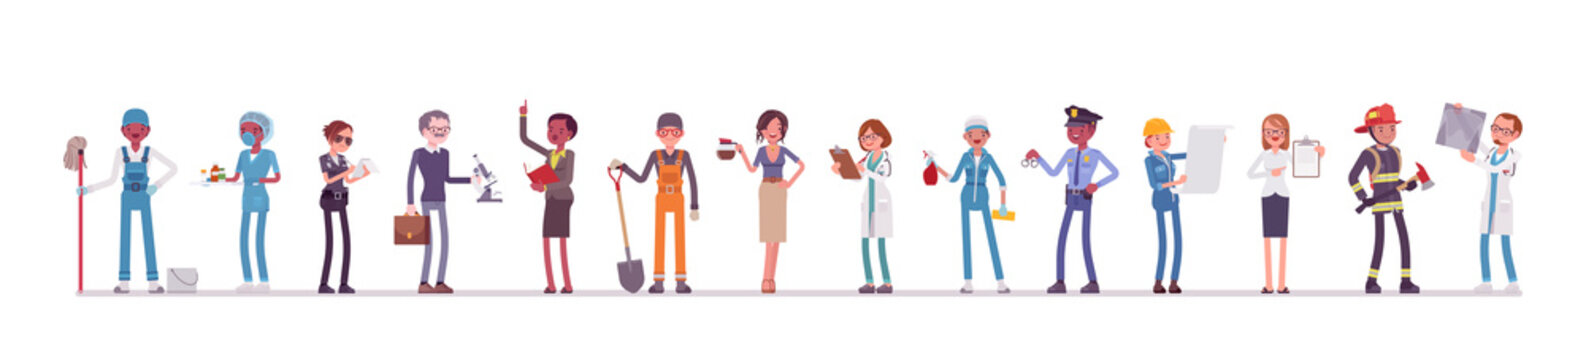 Different male, female professions and business. Working people, in occupation standing together, employee union, career. Vector flat style cartoon illustration isolated, white background, full length